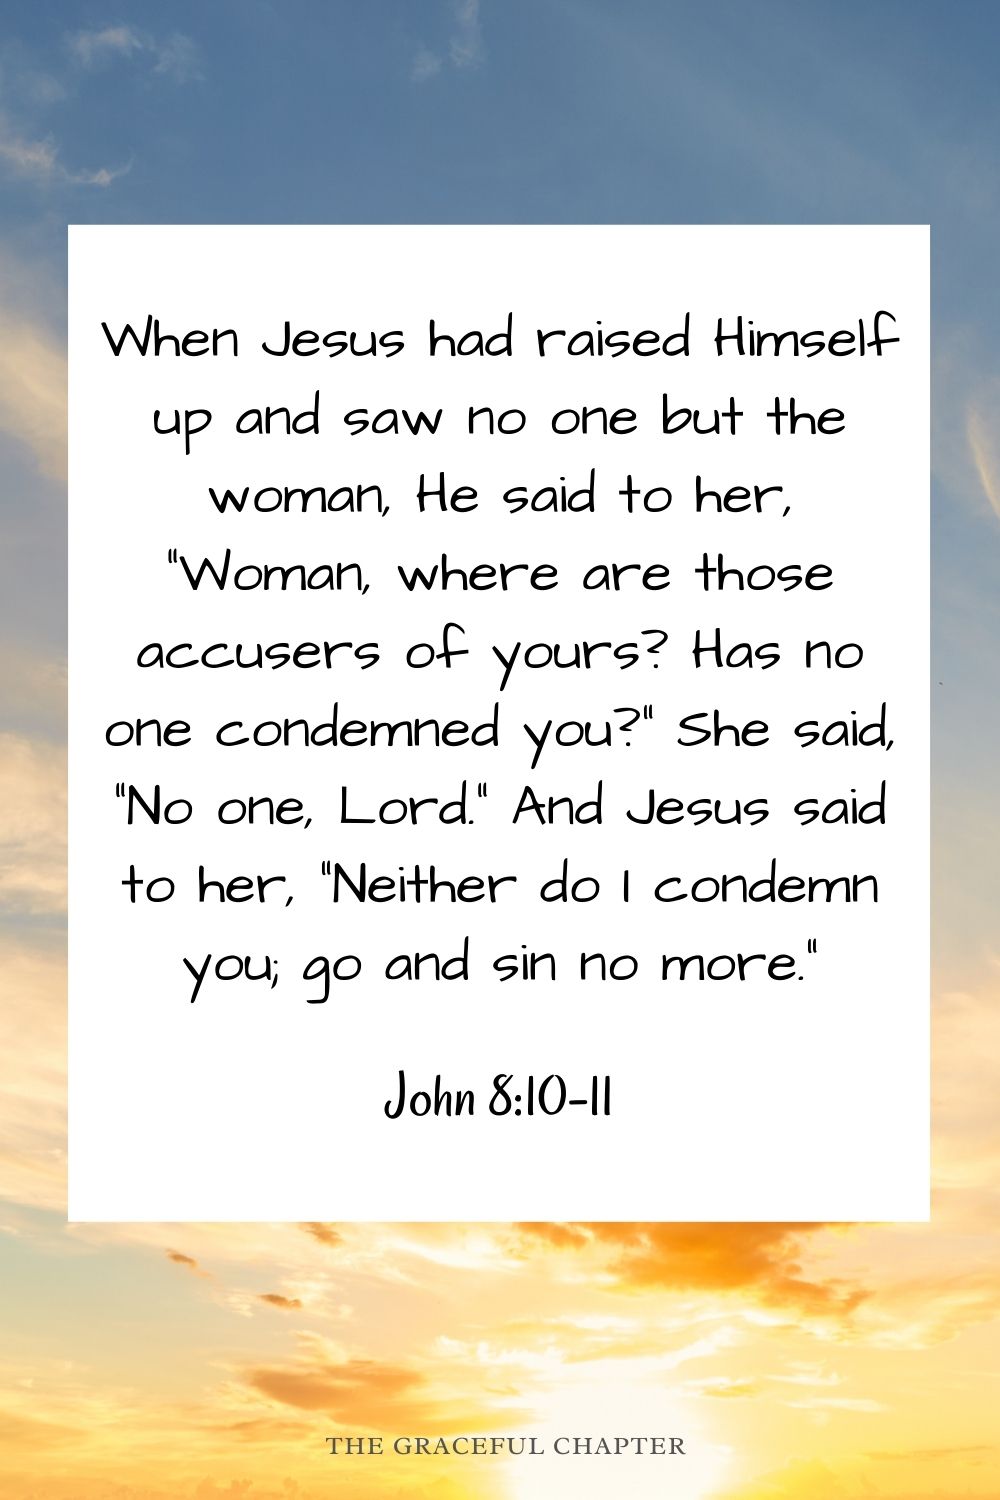 When Jesus had raised Himself up and saw no one but the woman, He said to her, “Woman, where are those accusers of yours? Has no one condemned you?” She said, “No one, Lord.” And Jesus said to her, “Neither do I condemn you; go and sin no more.” John 8:10-11